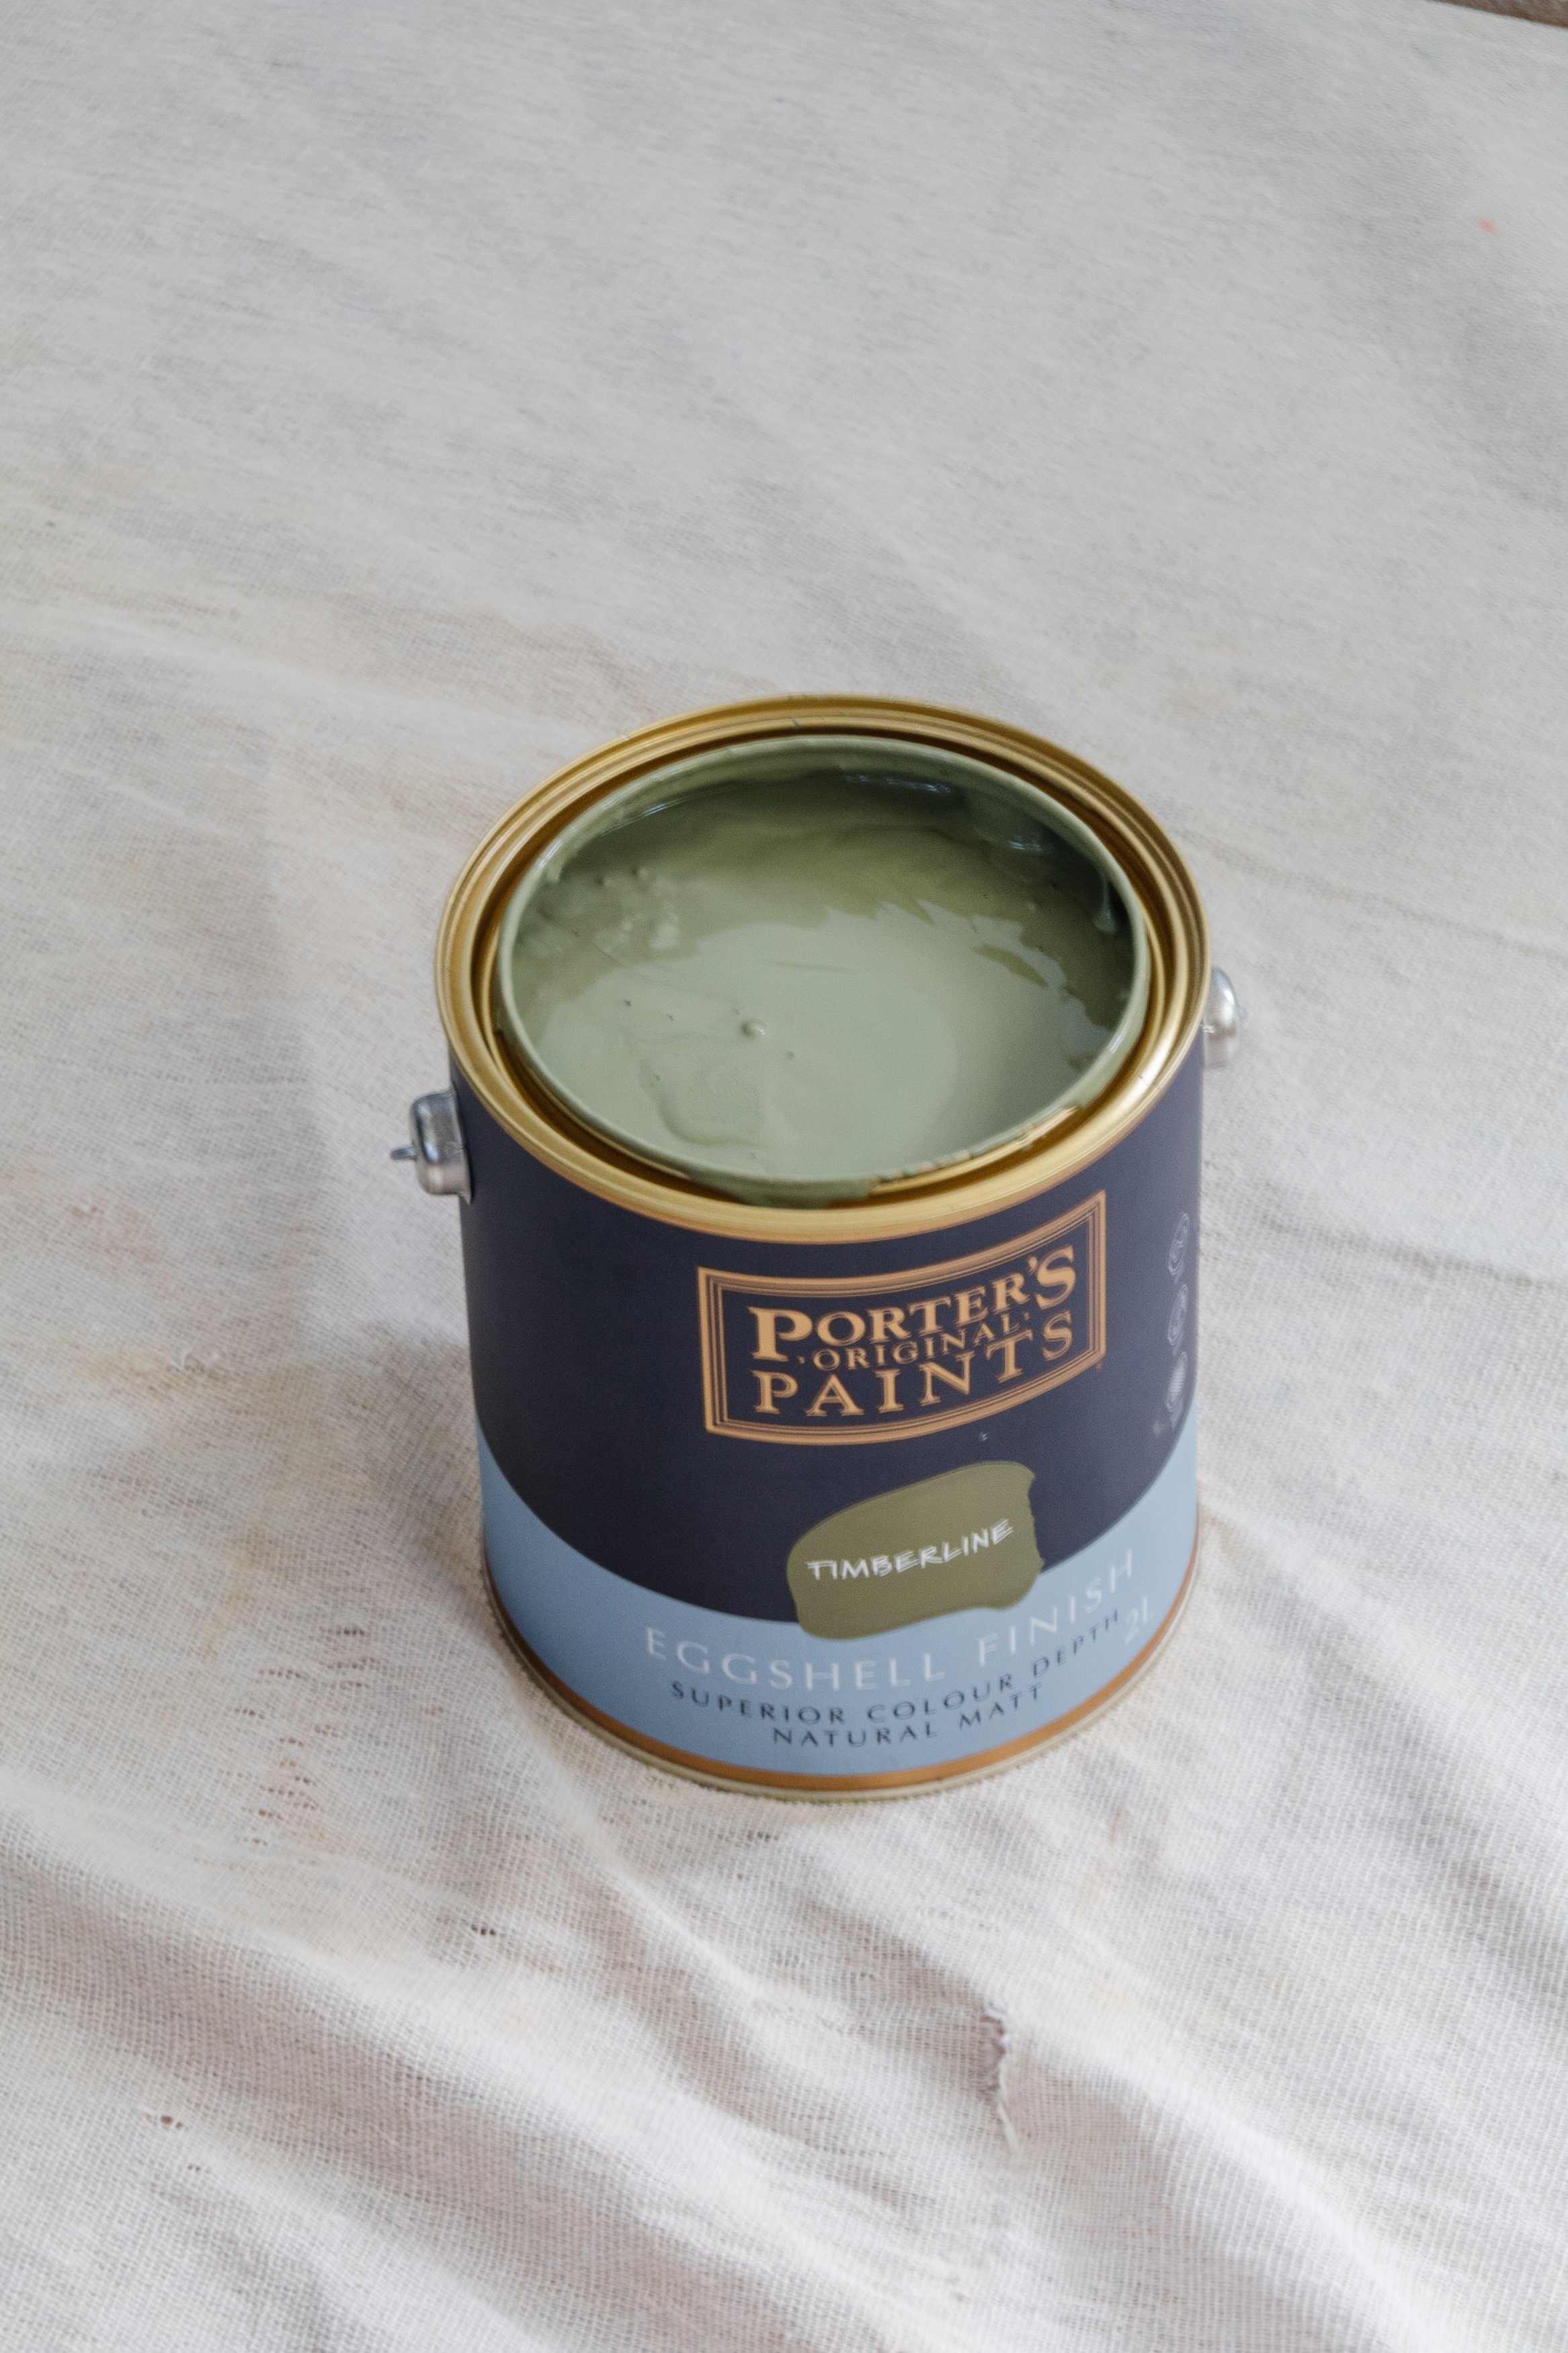 Bedroom Makeover With Porter's Paints_Smor Home (25 of 62).jpg